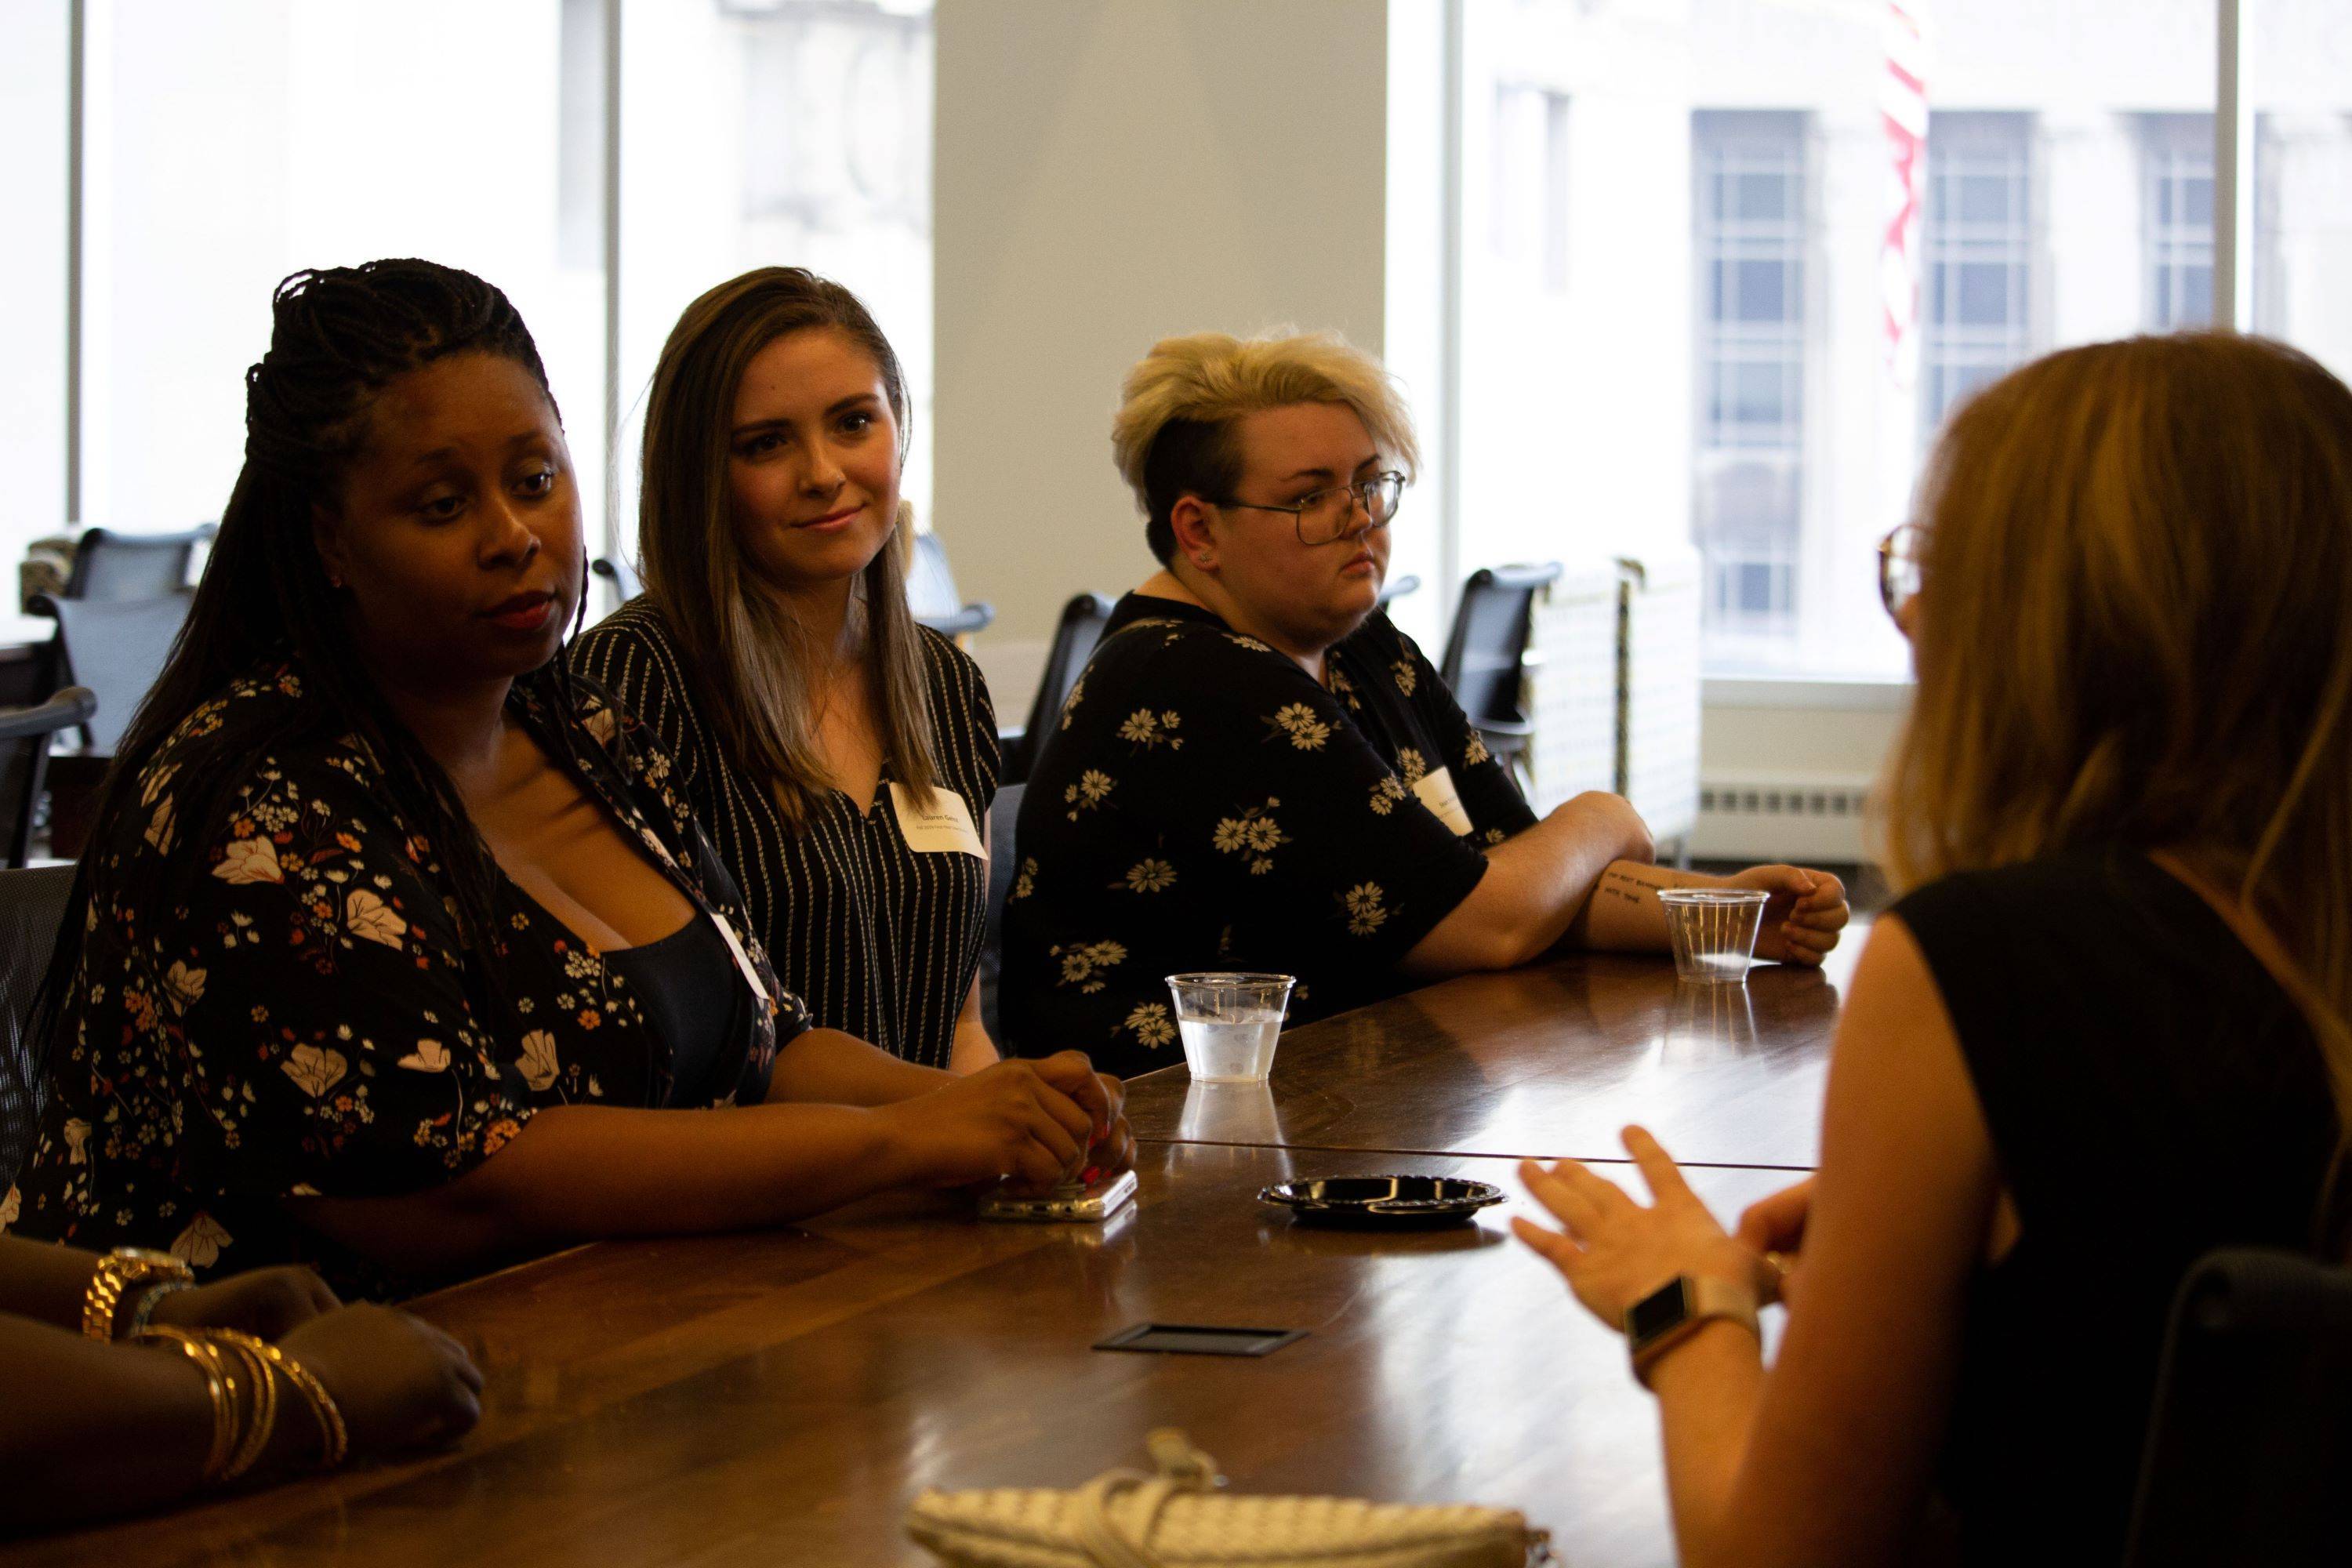 Four women have a discussion while sitting at a table.